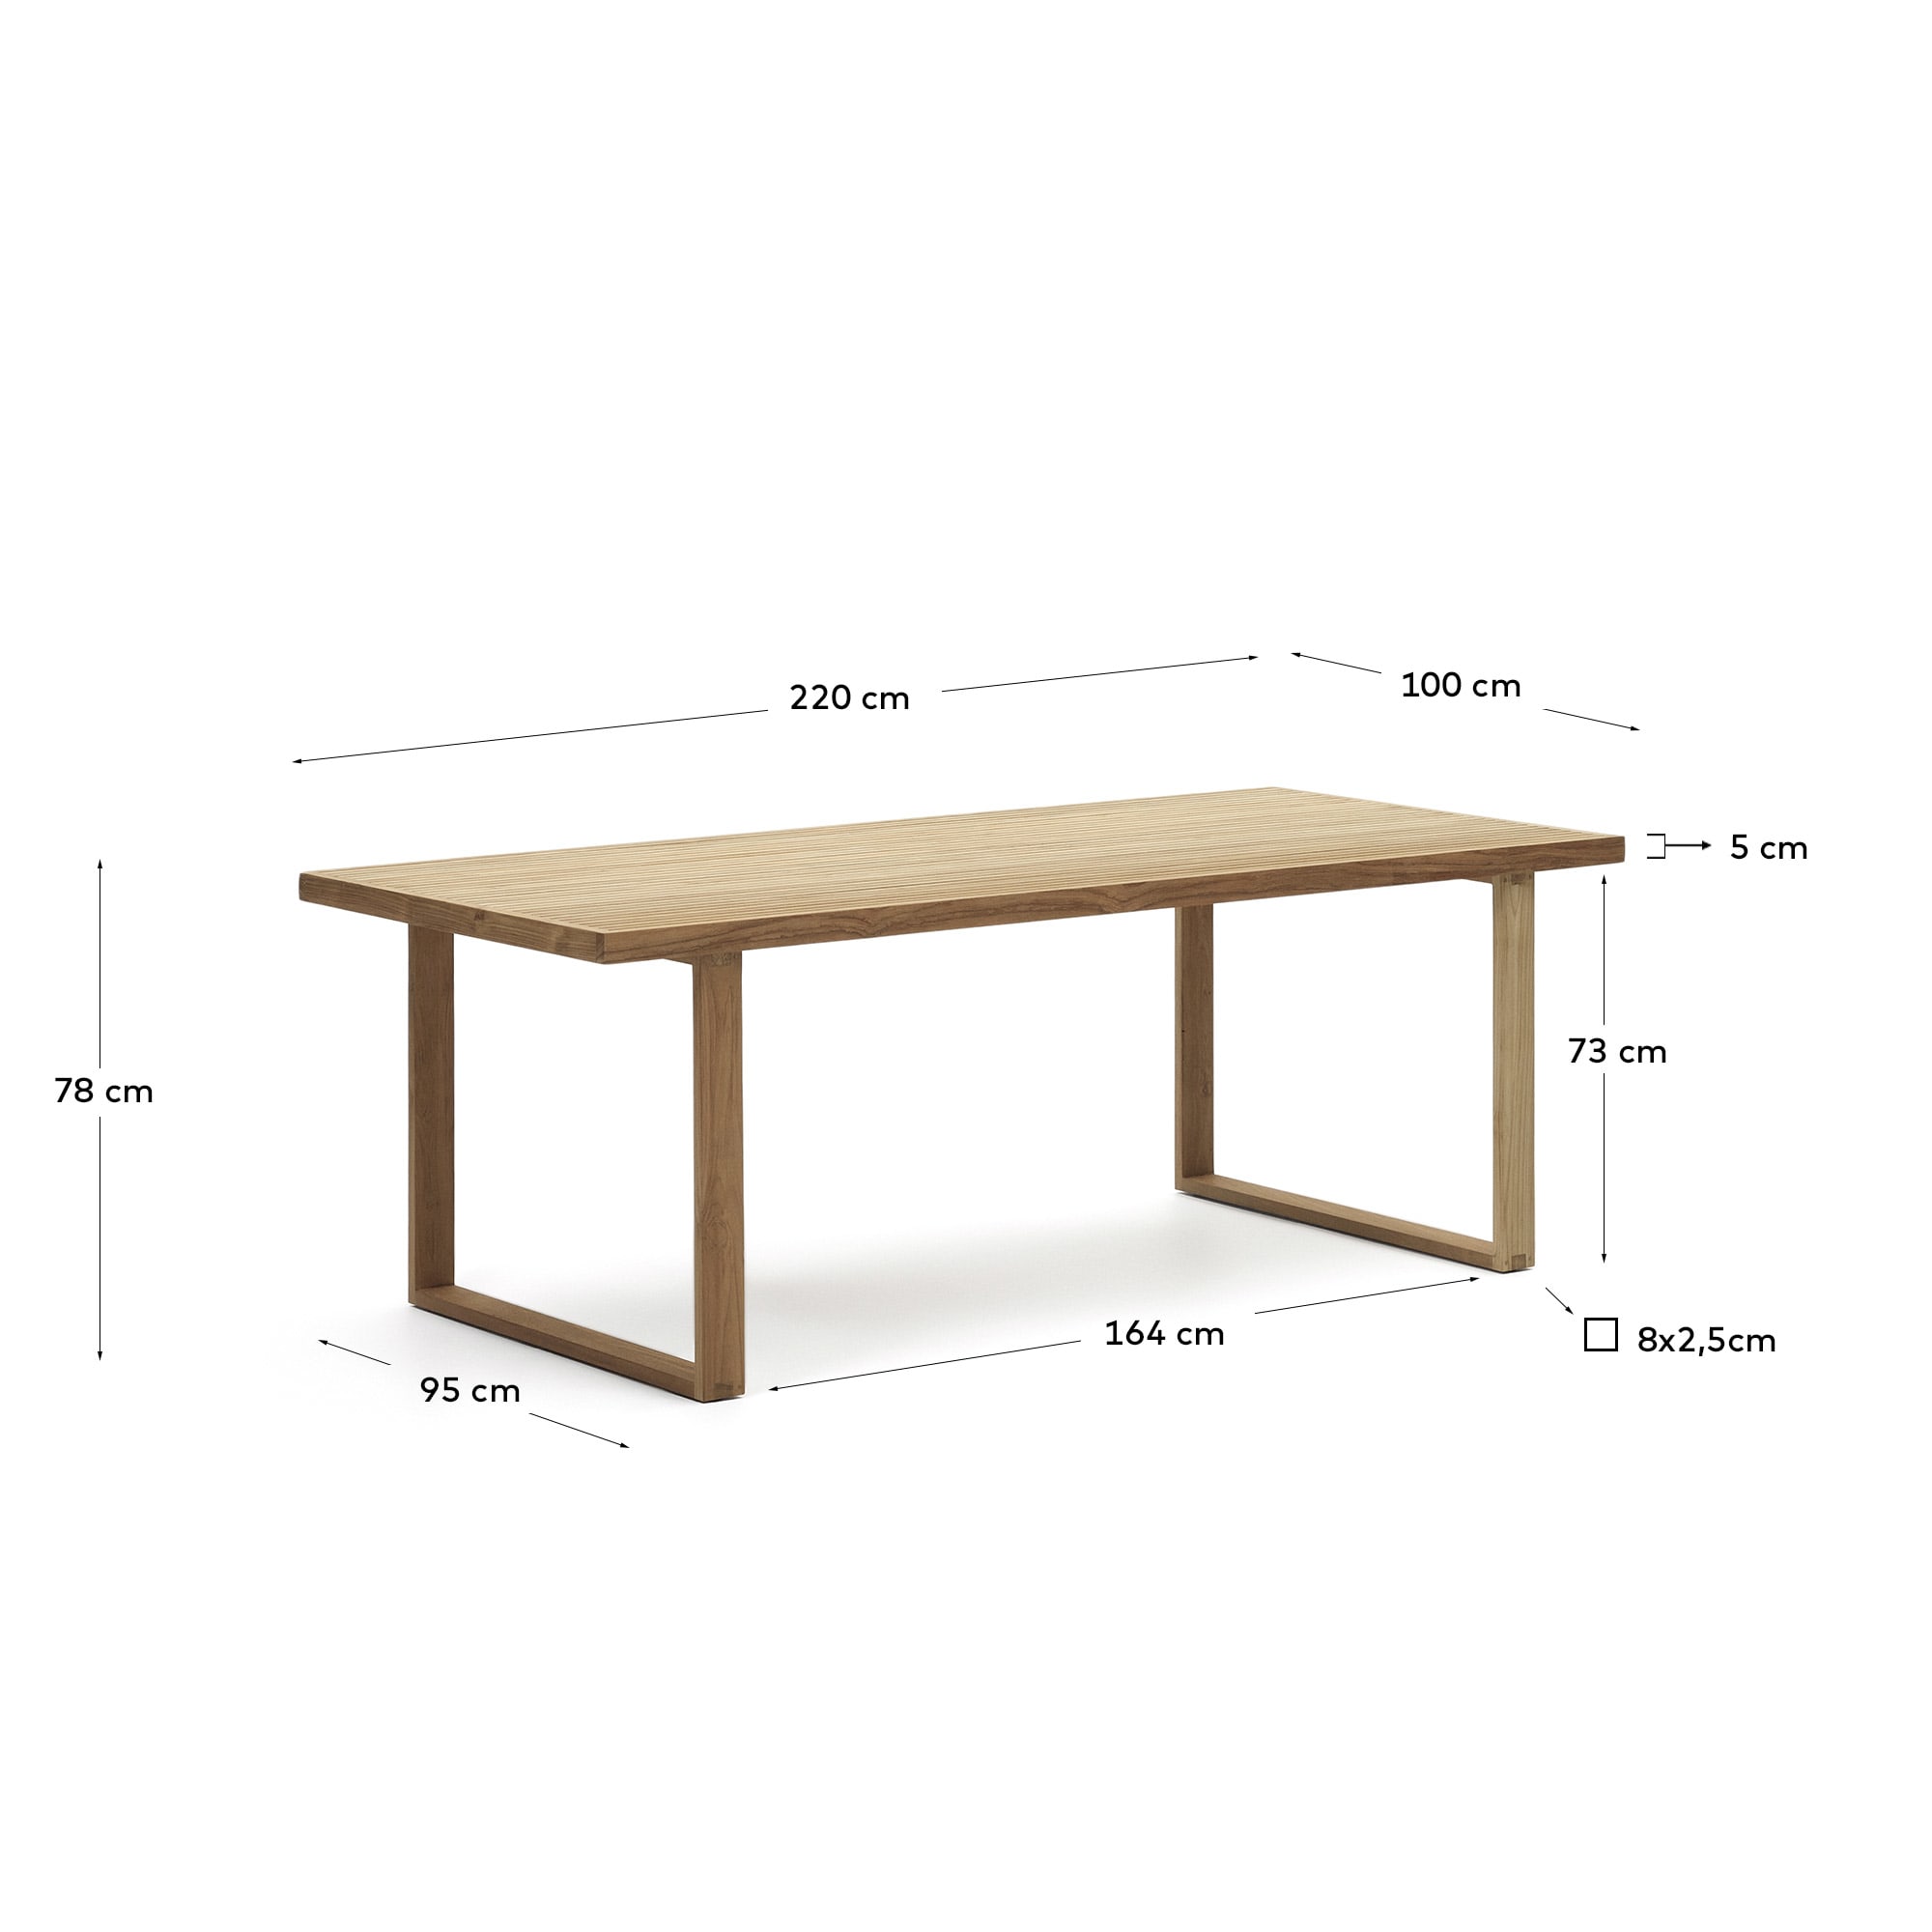 Canadell 100% outdoor solid recycled teak table, 220 x 100 cm - sizes